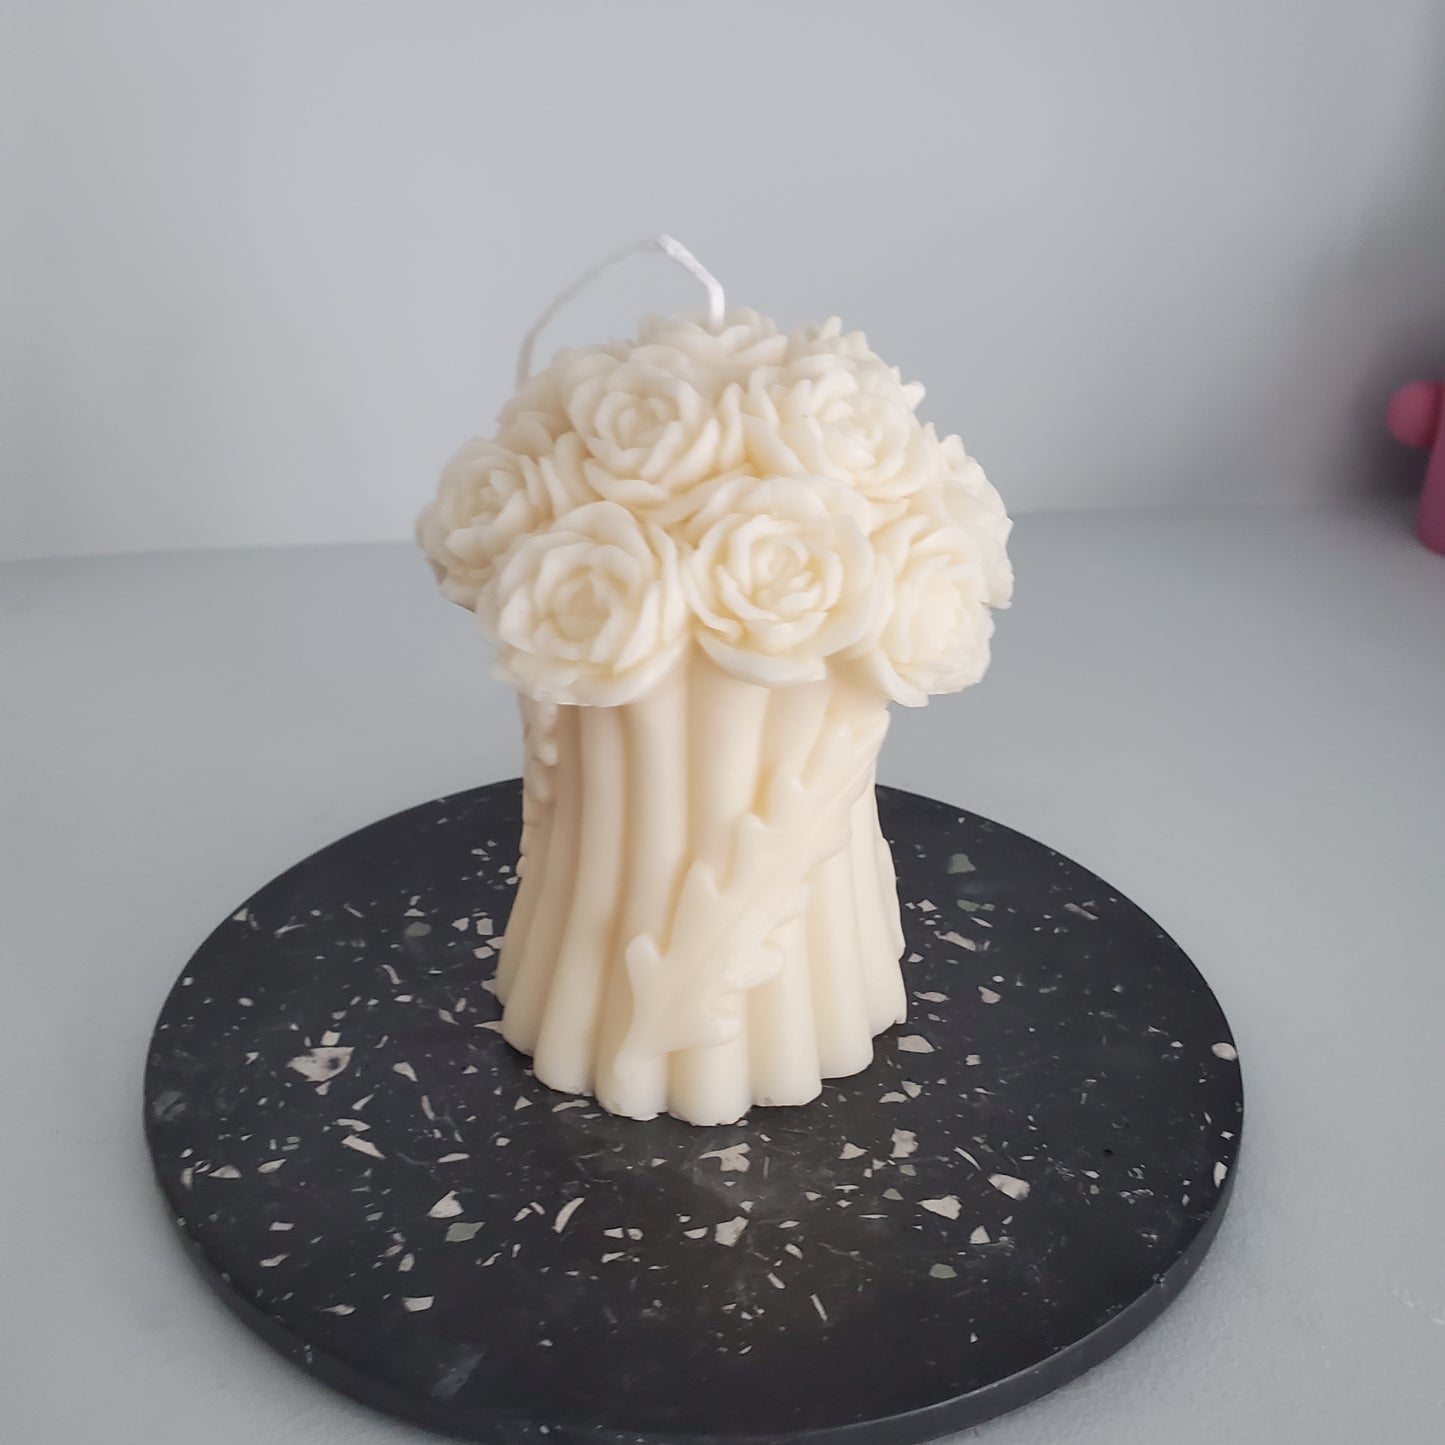 Flower bouquet candle, wedding gift, rose candle